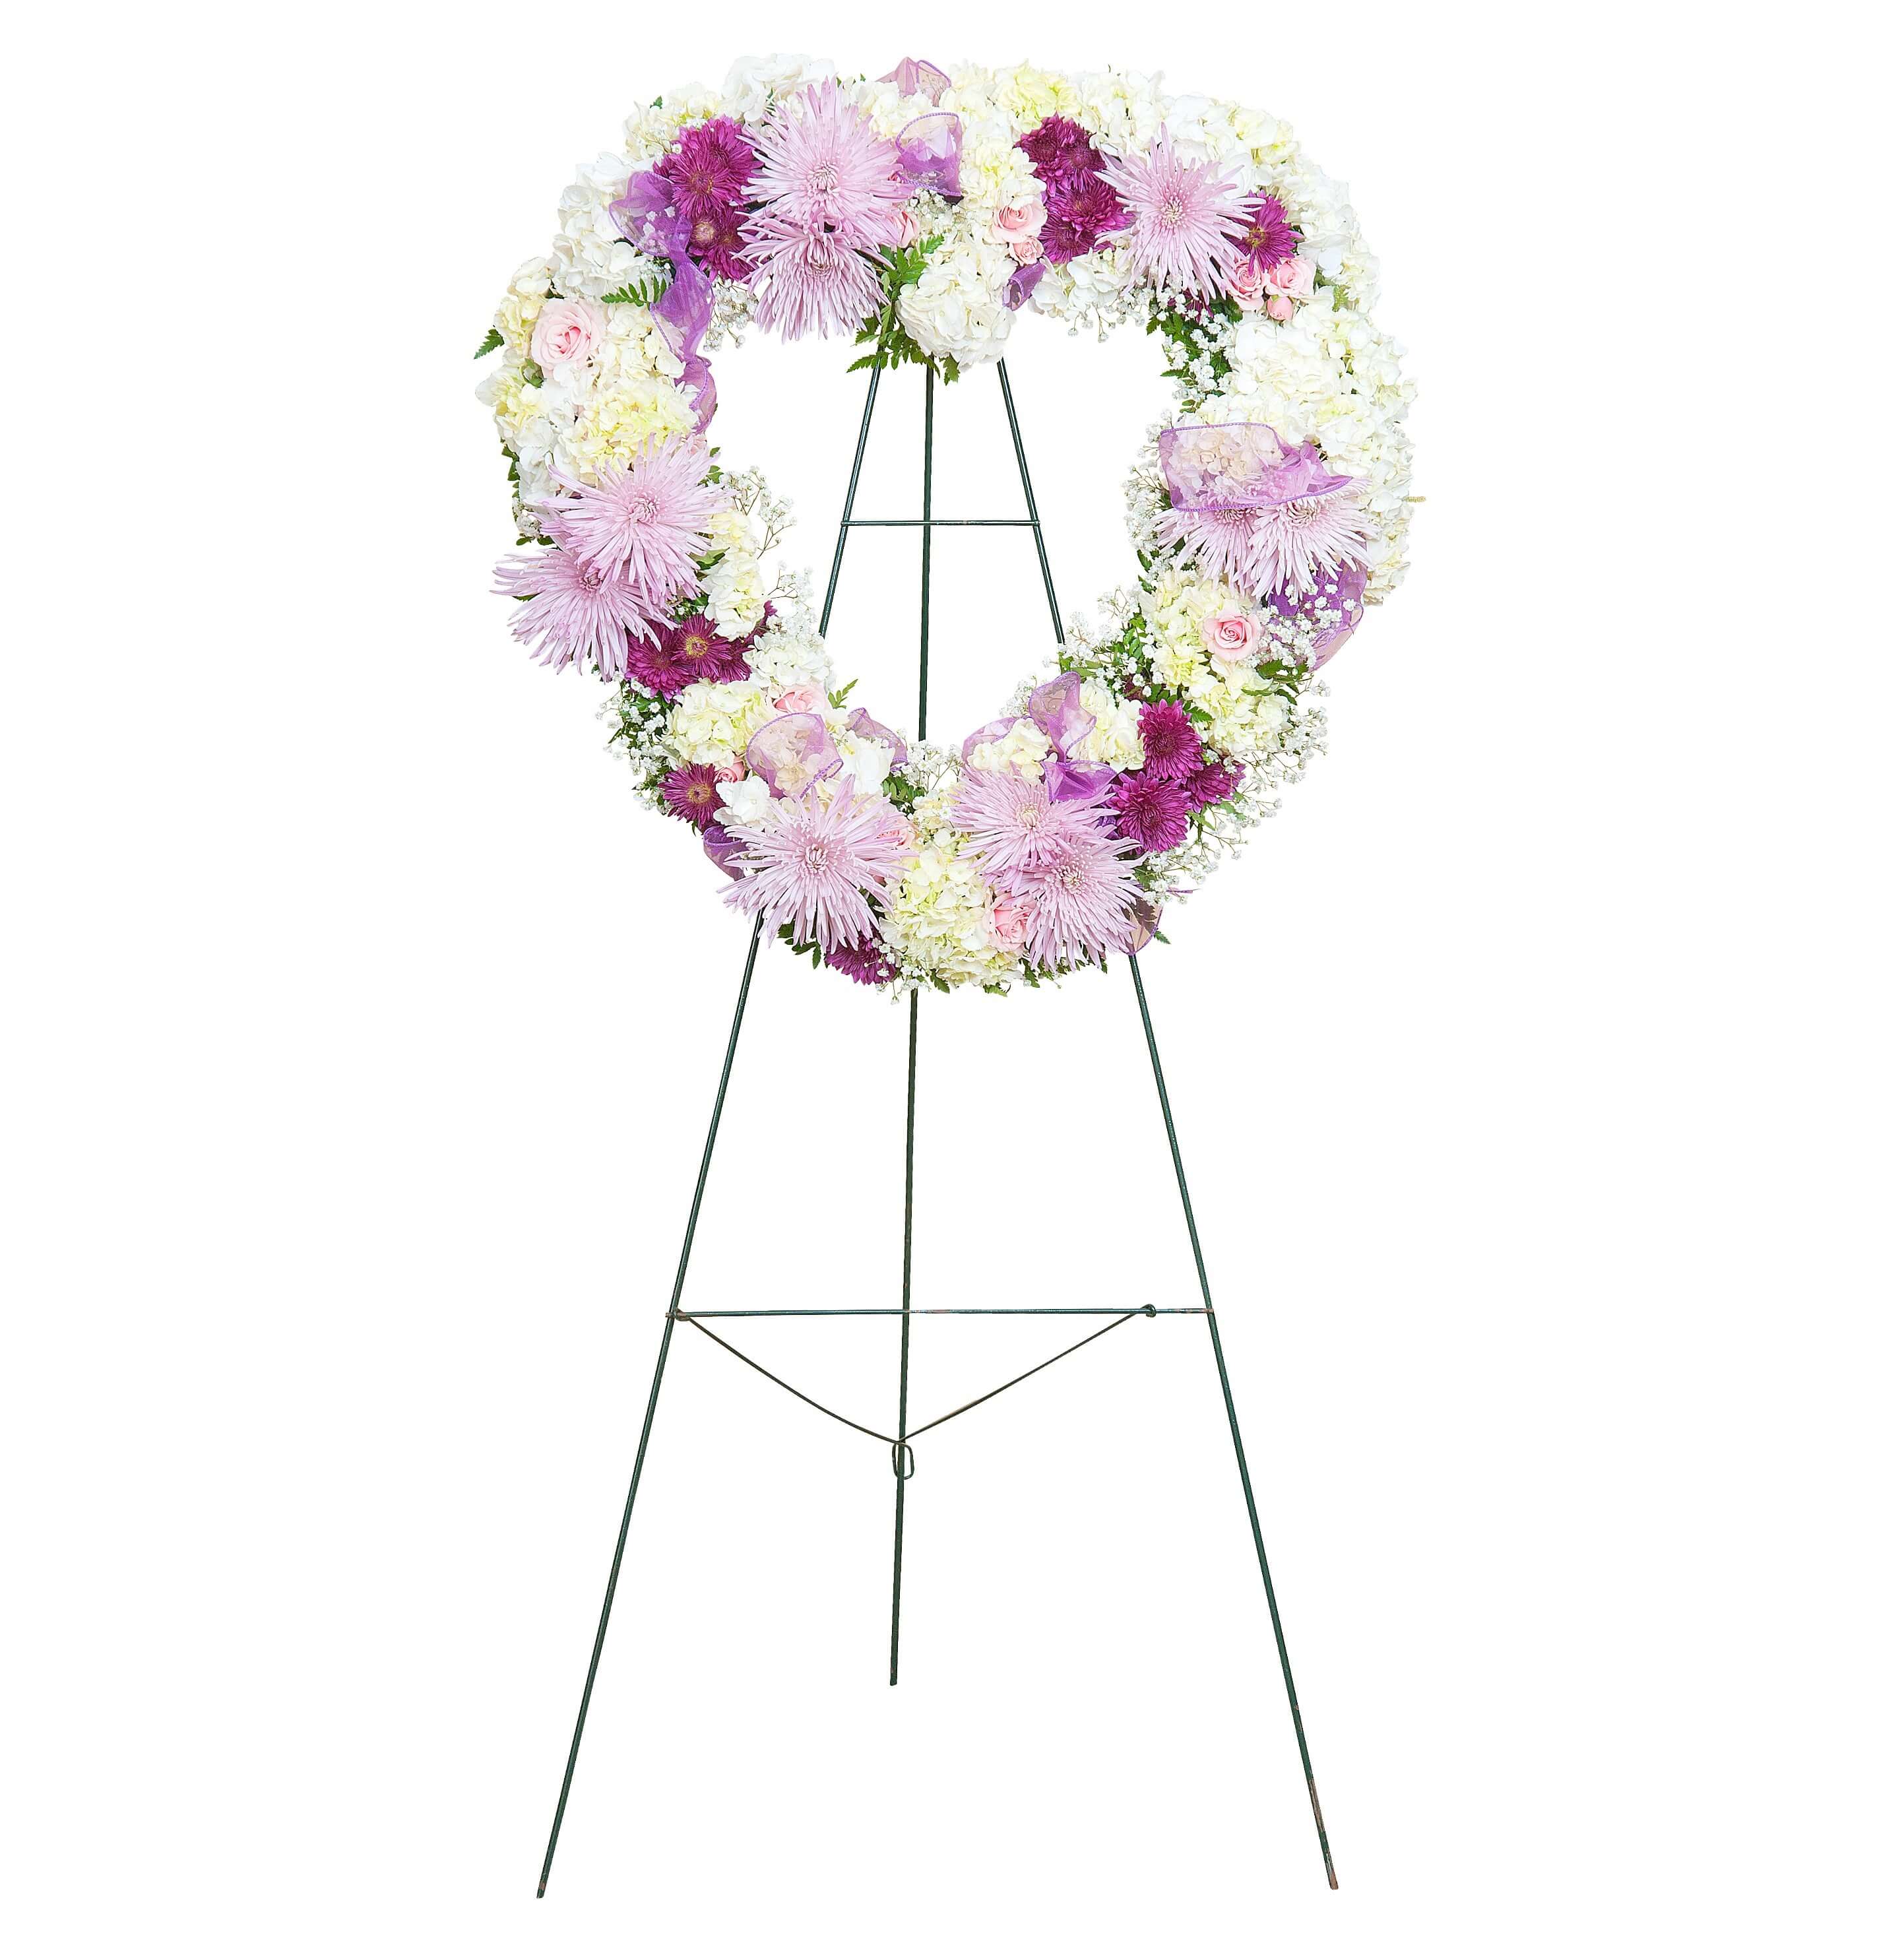 Sweetheart Standing Spray - Soft pastel pink and lavender blooms combine to make a sweetheart combination.